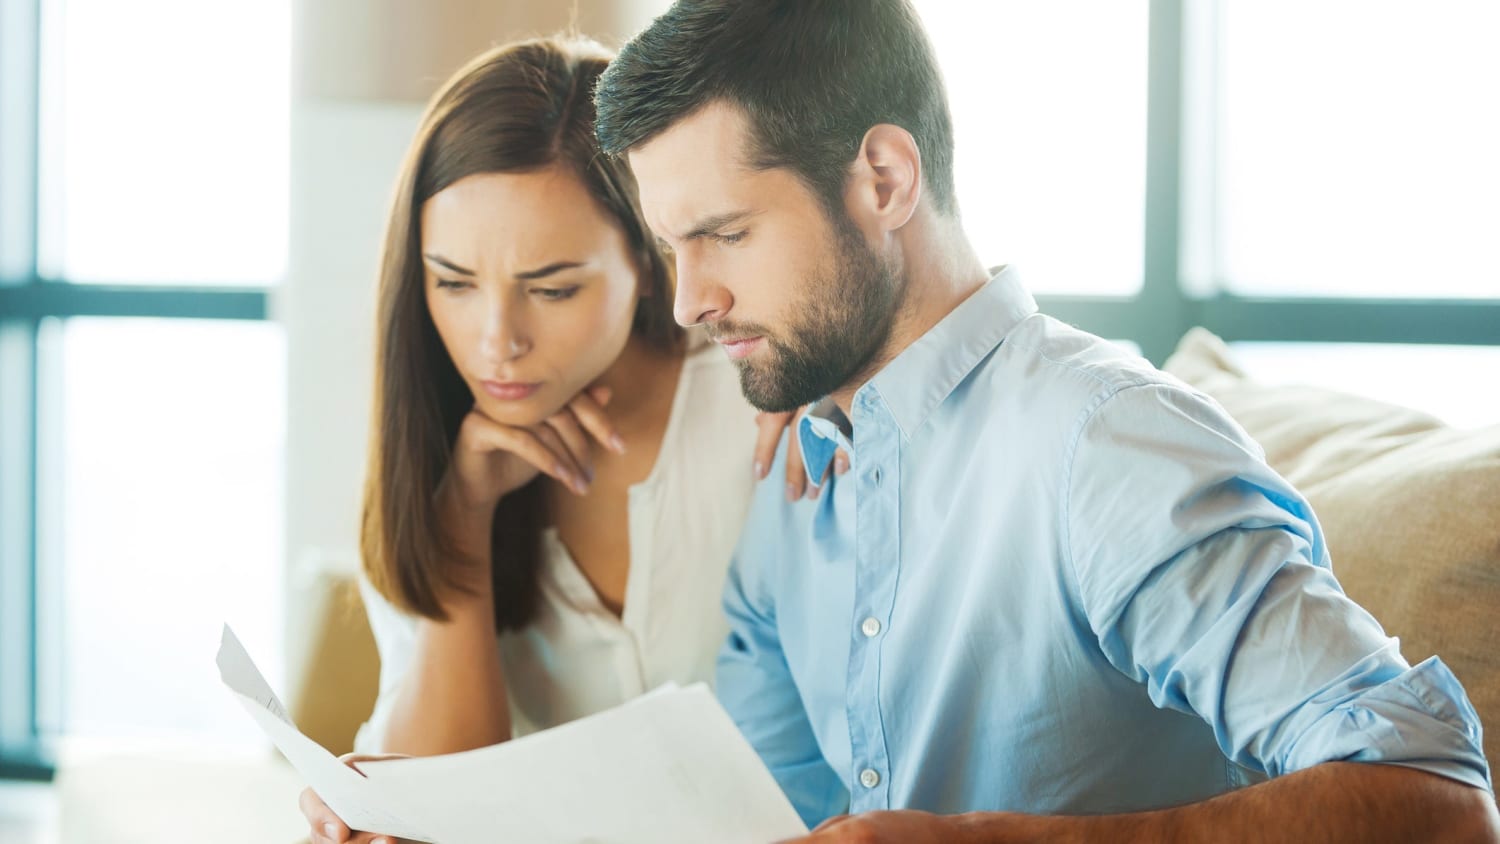 Lying about your finances can hurt your relationship. Here's why you should come clean